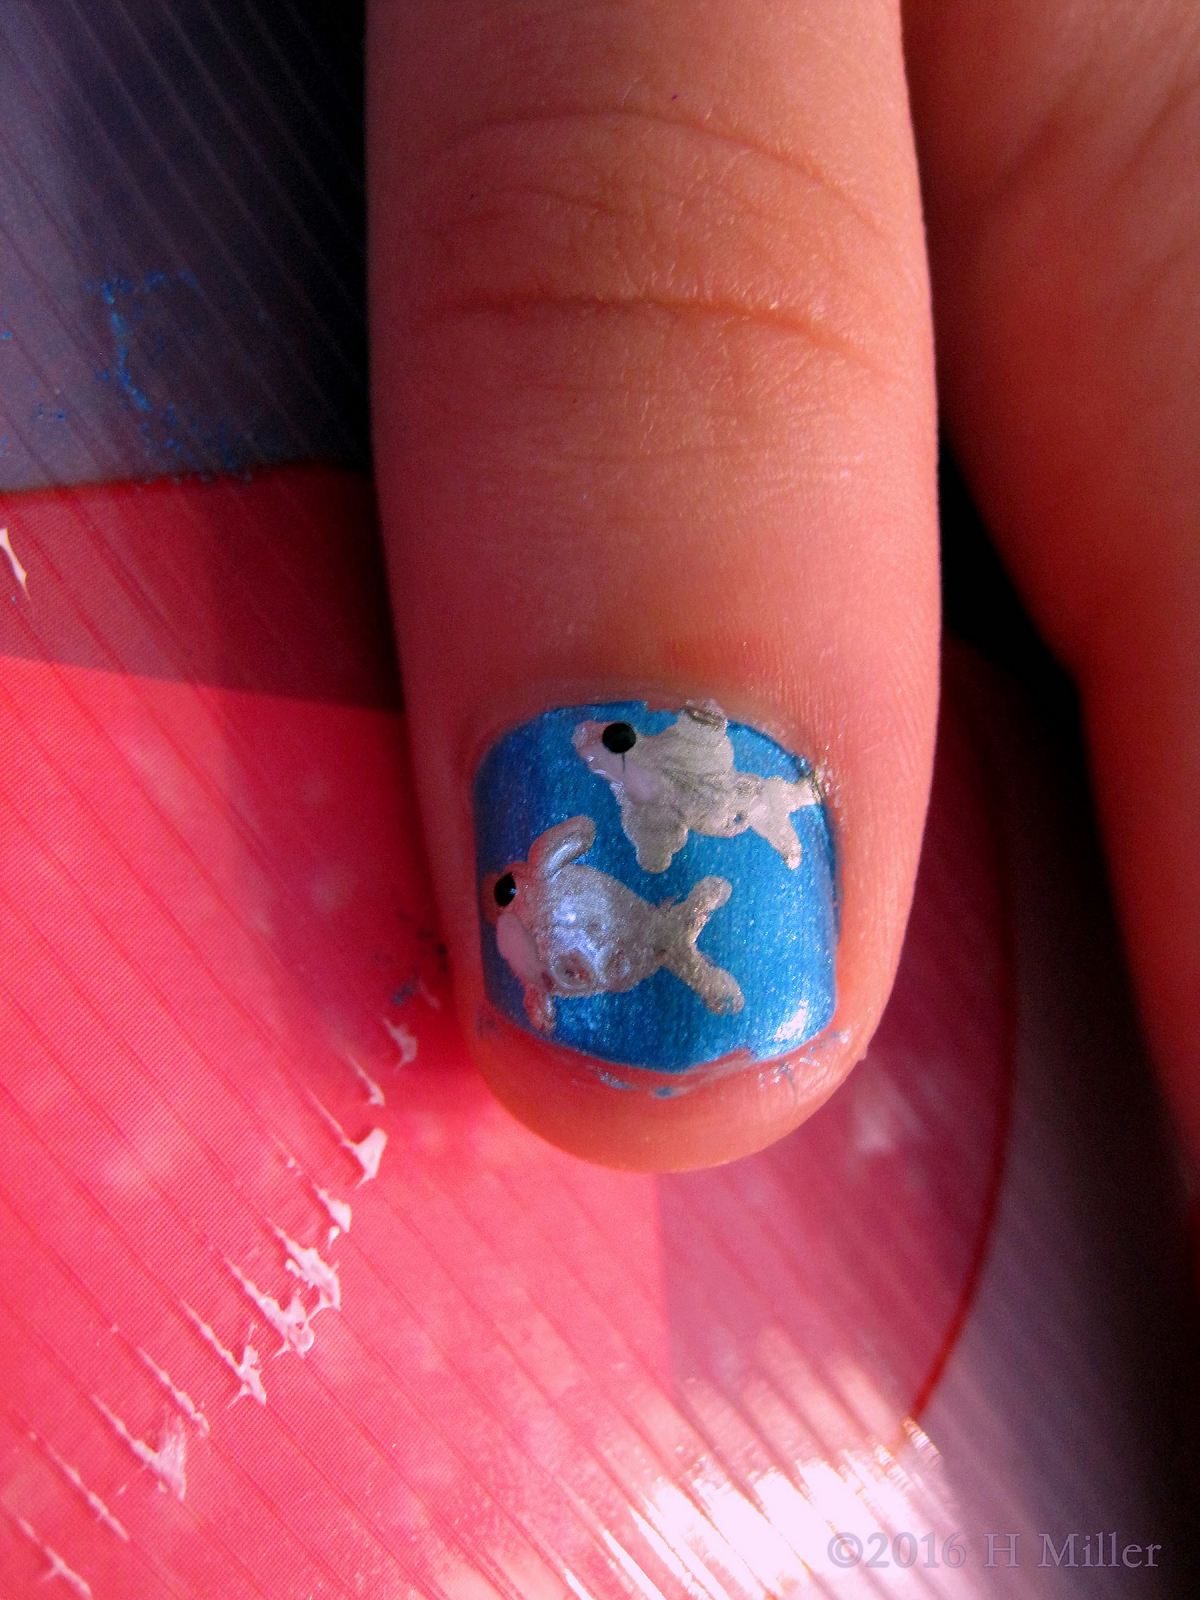 She Has Fish On Her Nail! What A Cute Nail Design. 